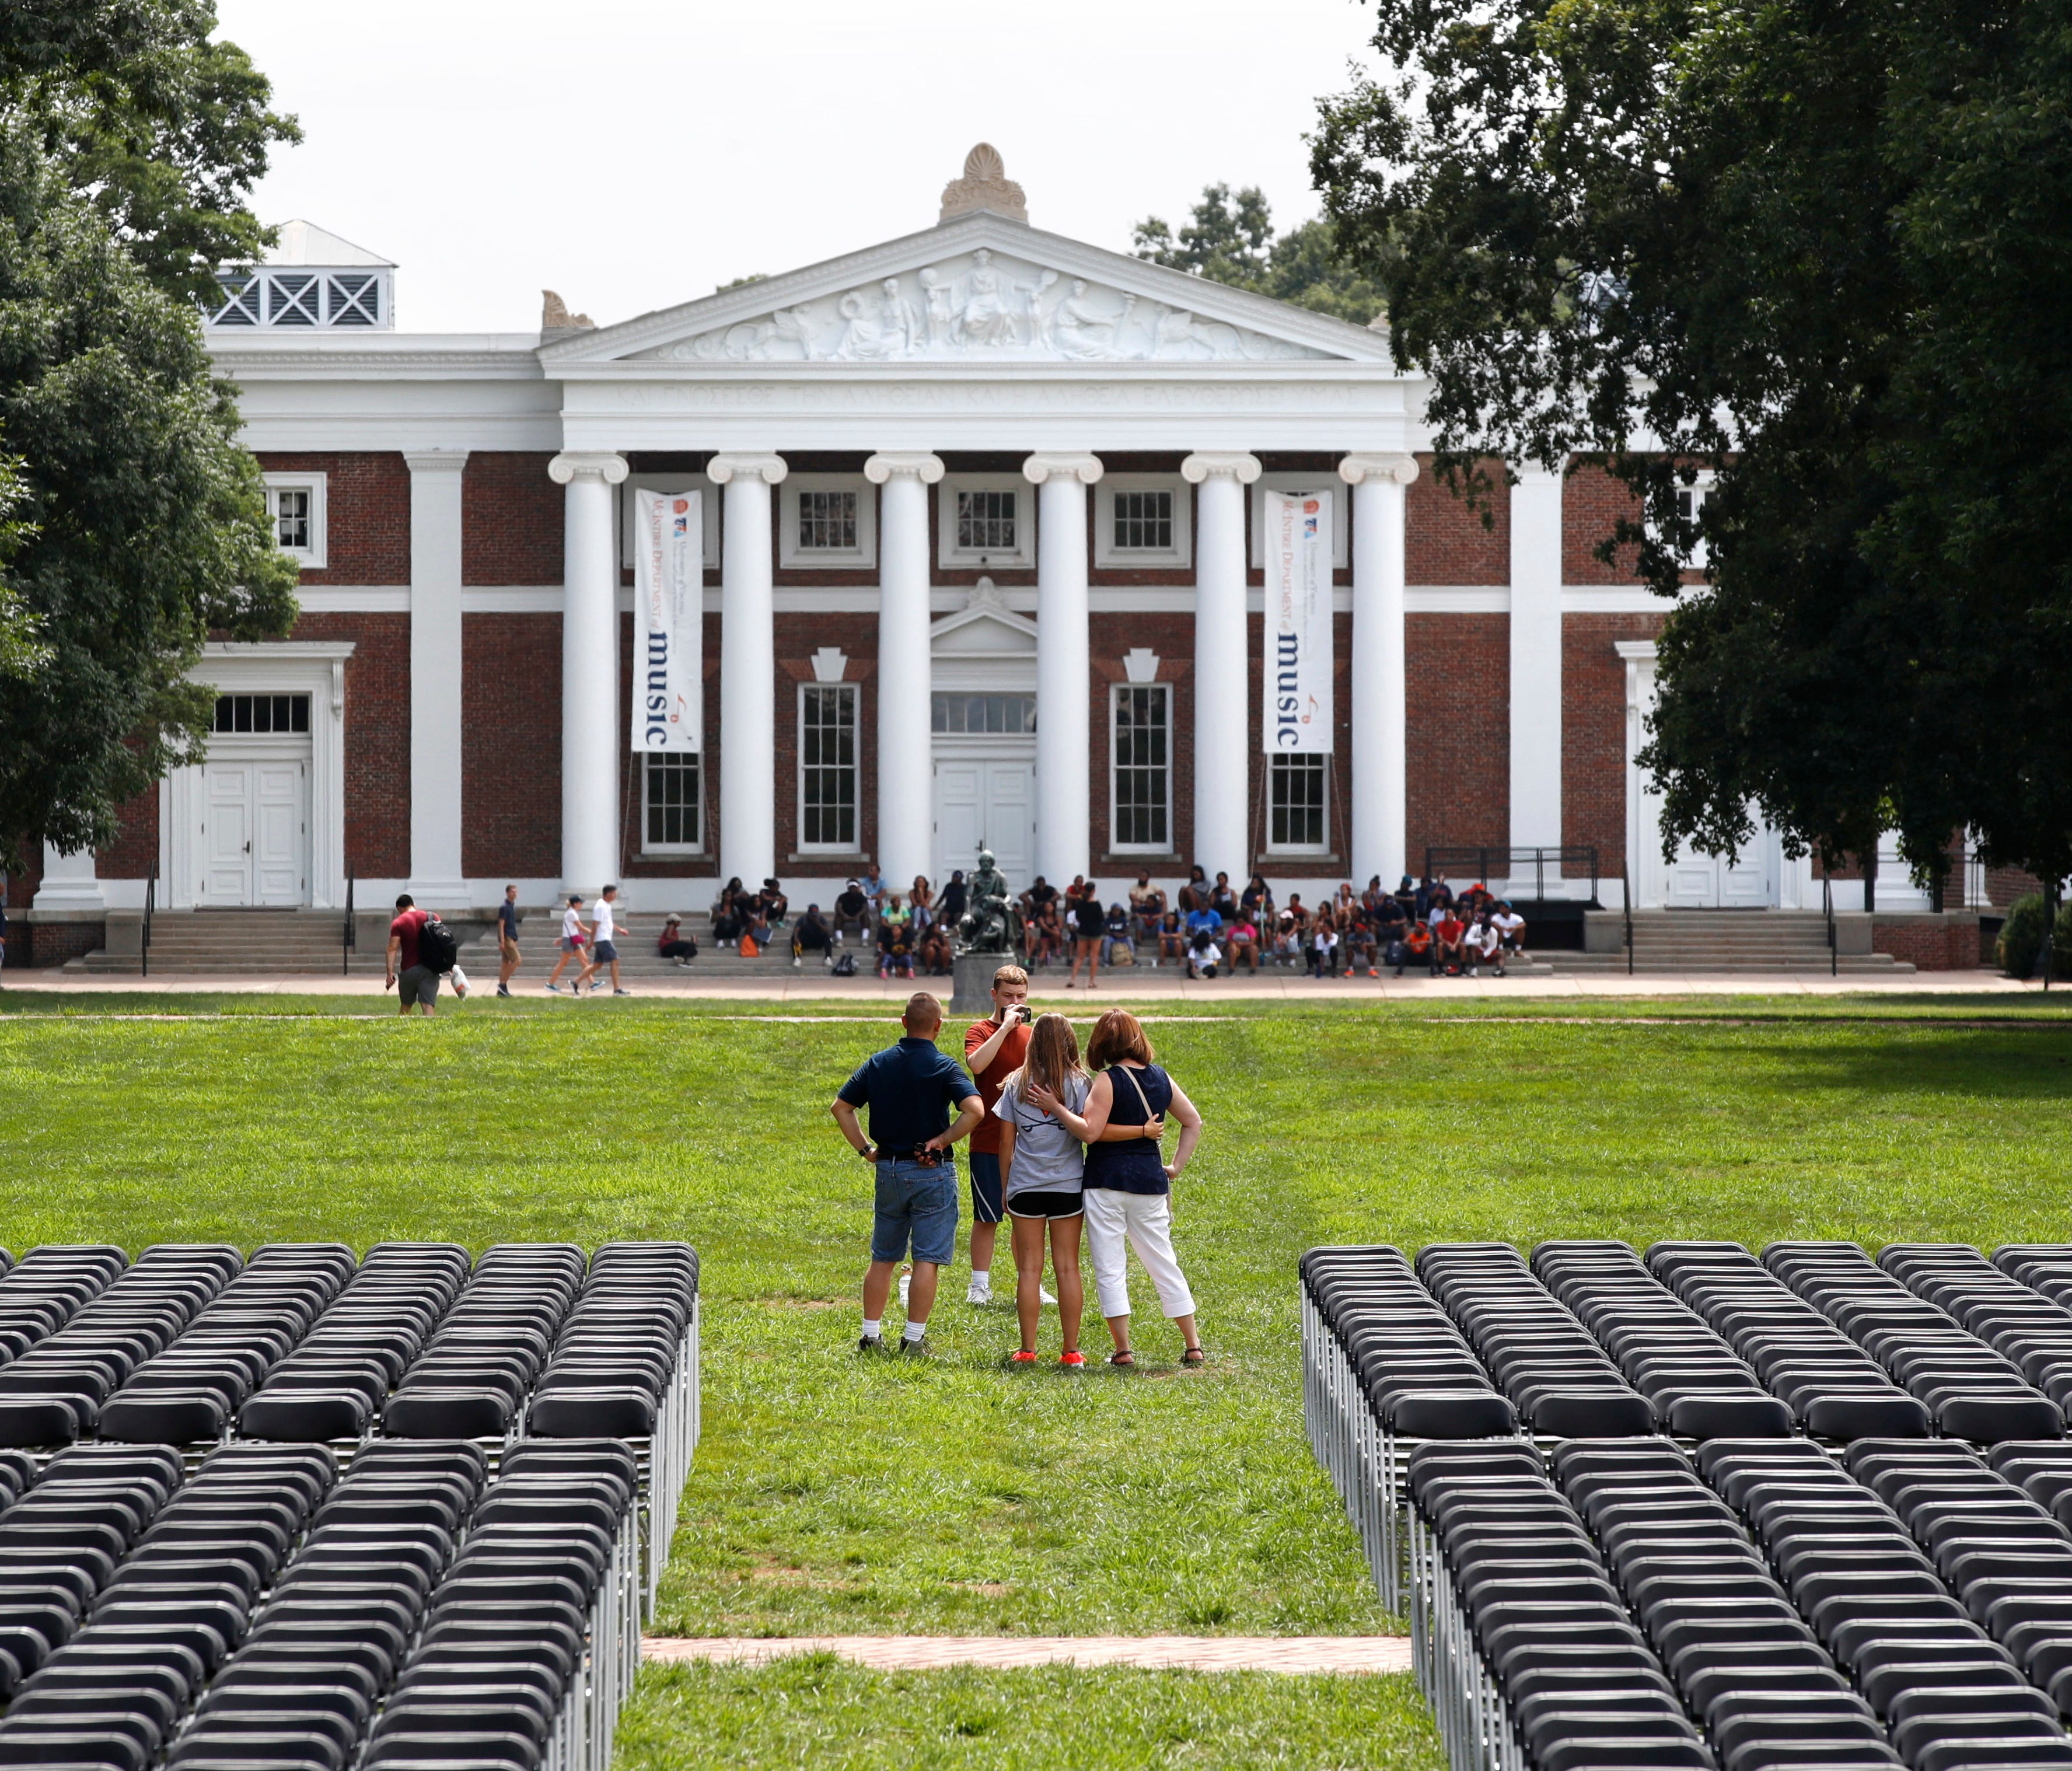 A view of the Lawn of the campus of University of Virginia in Charlottesville.